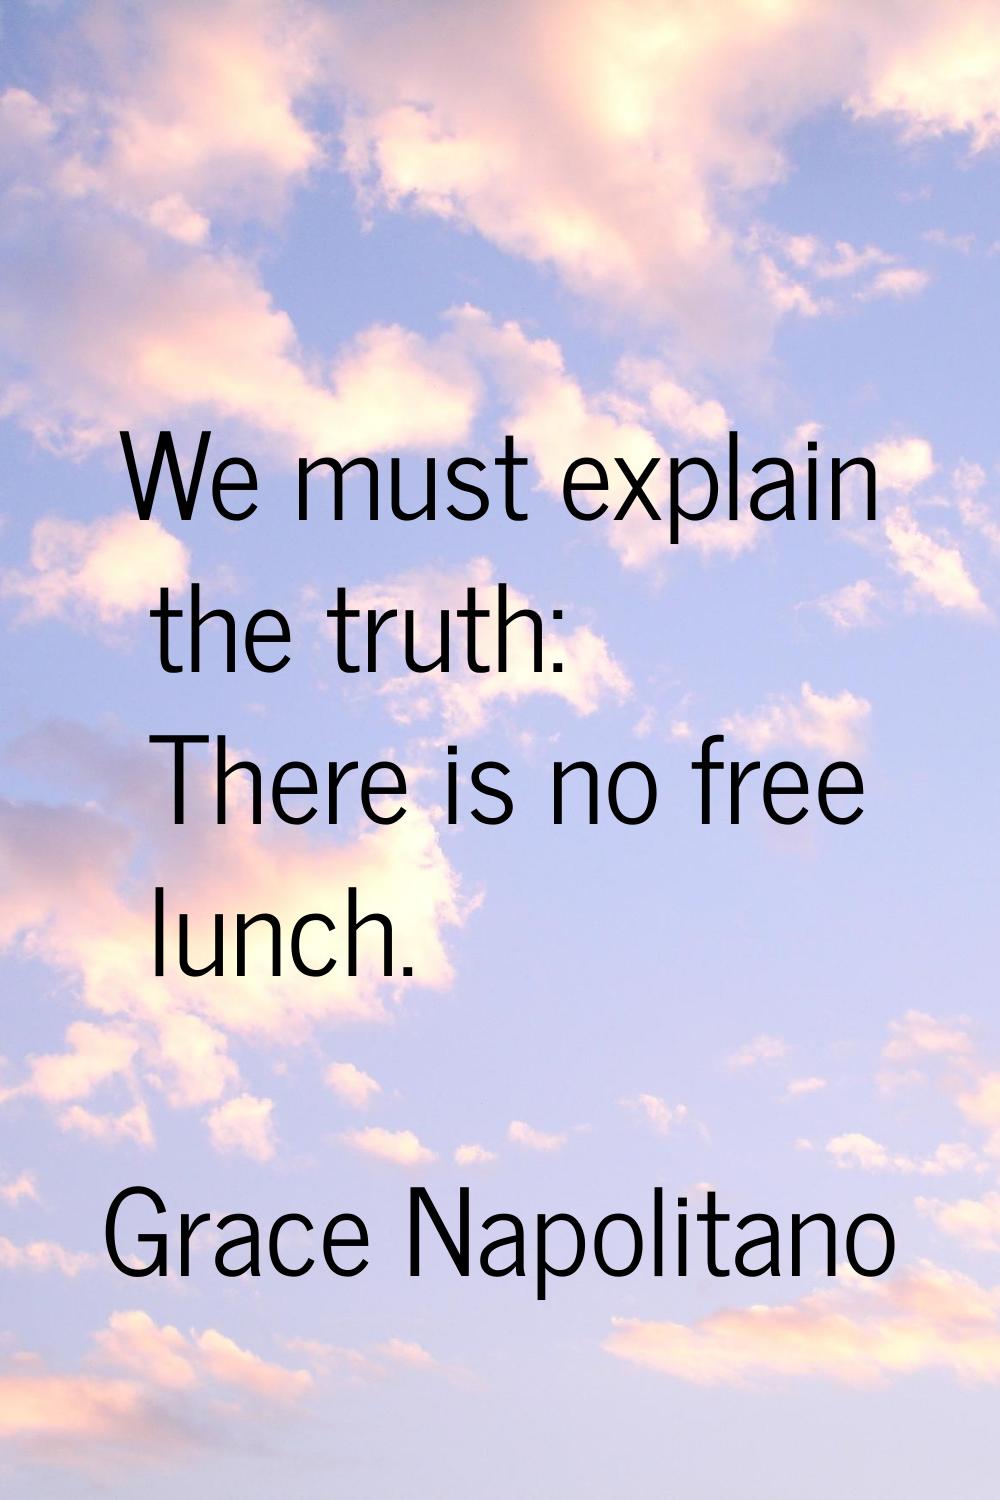 We must explain the truth: There is no free lunch.